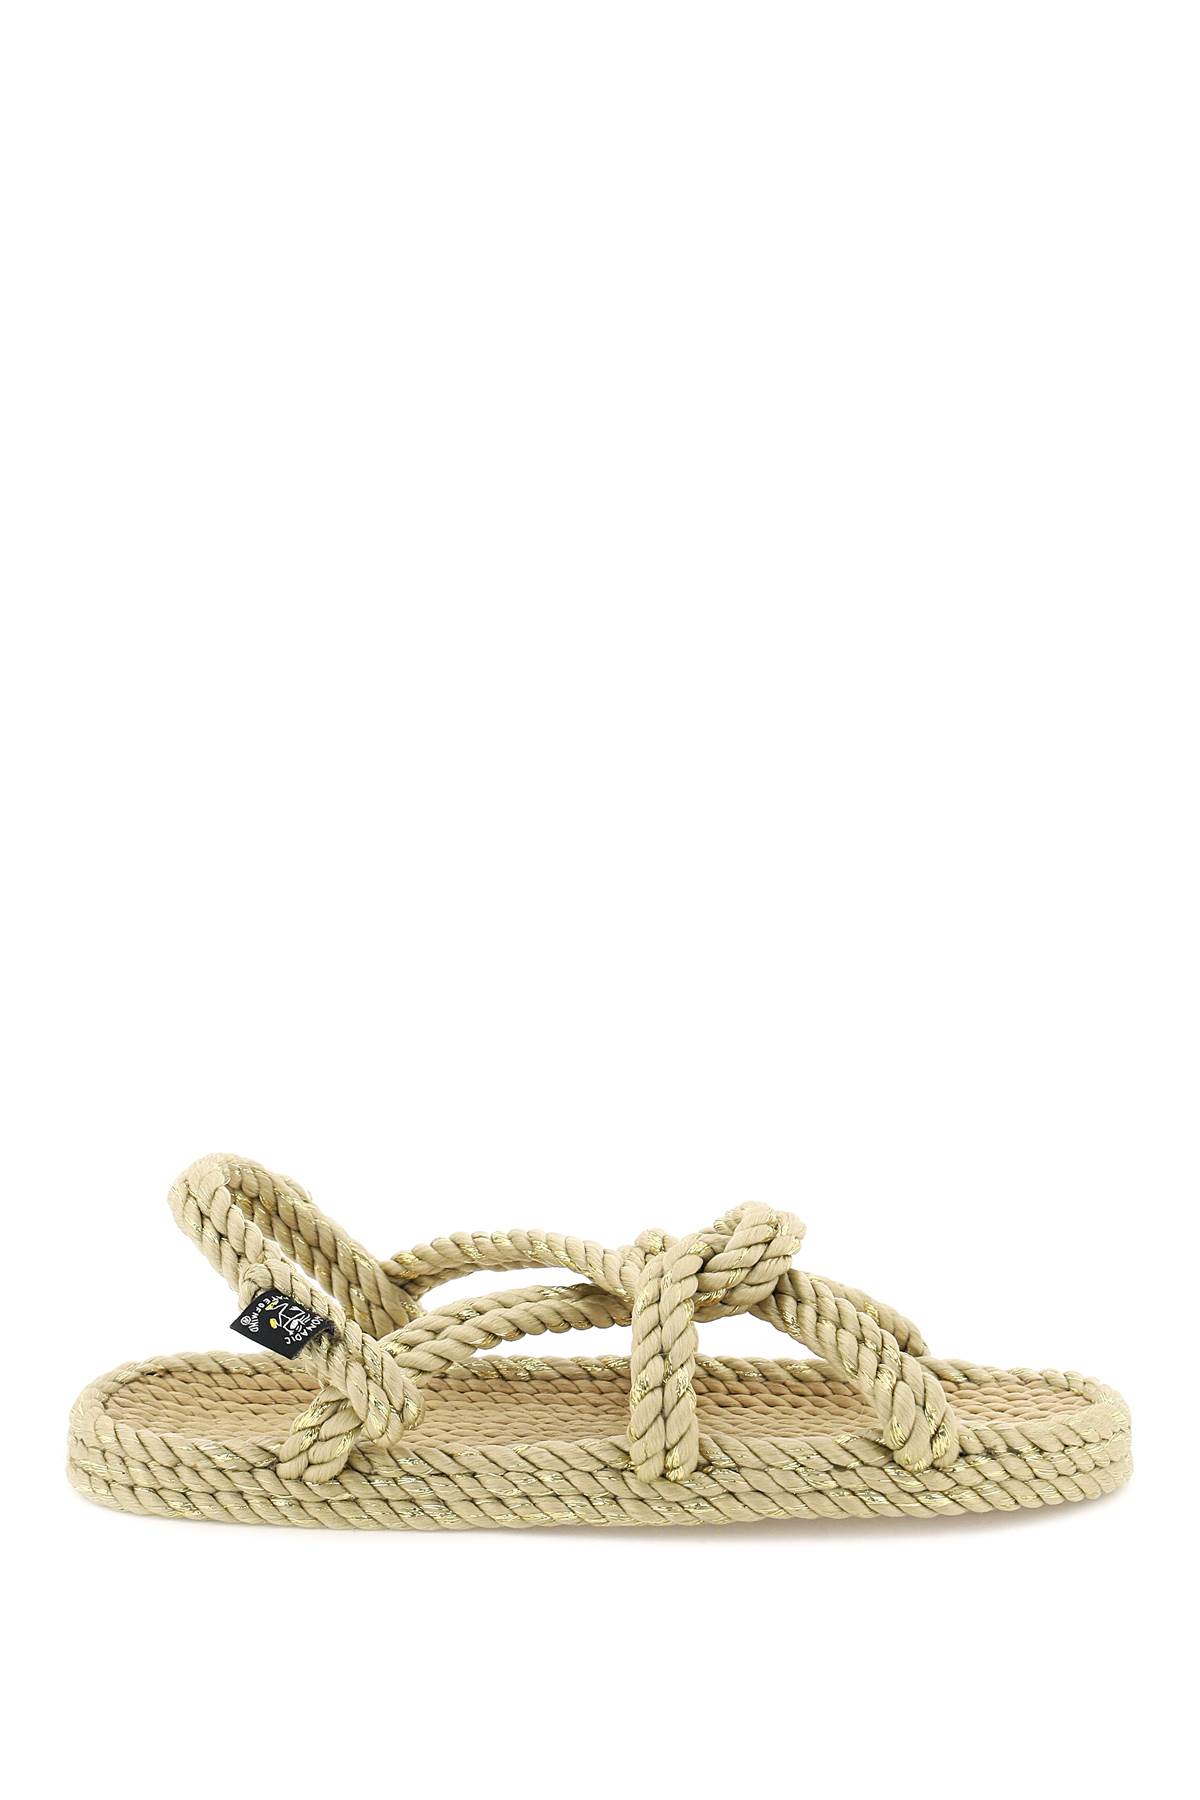 NOMADIC STATE OF MIND MOUNTAIN MOMMA S ROPE SANDALS